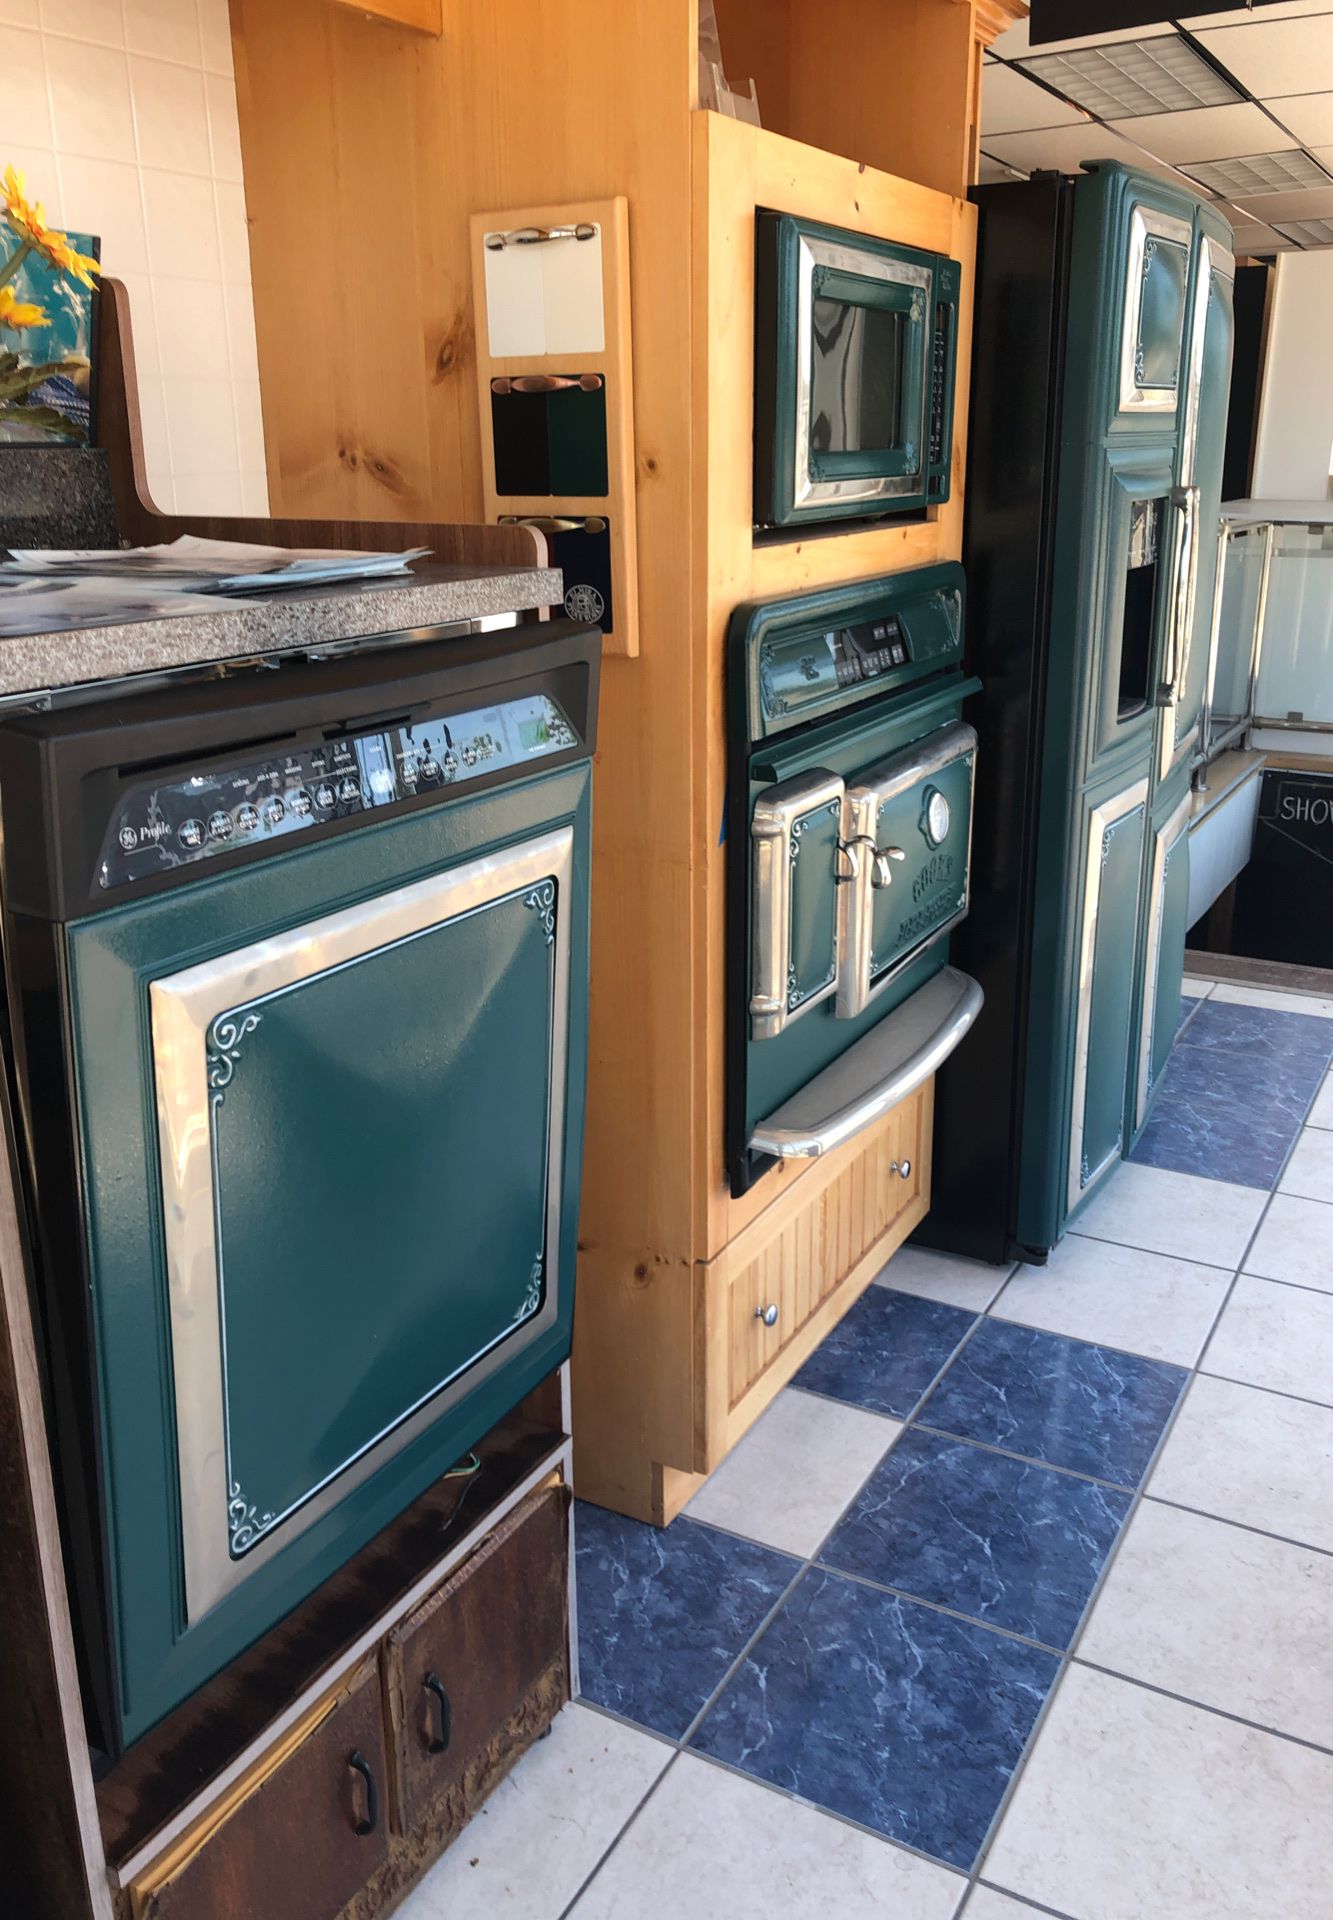 All appliances made by GE with the Elmira Trim. Gorgeous set of 4 appliances. Refrigerator, wall oven, microwave, and dishwasher. The retail price is